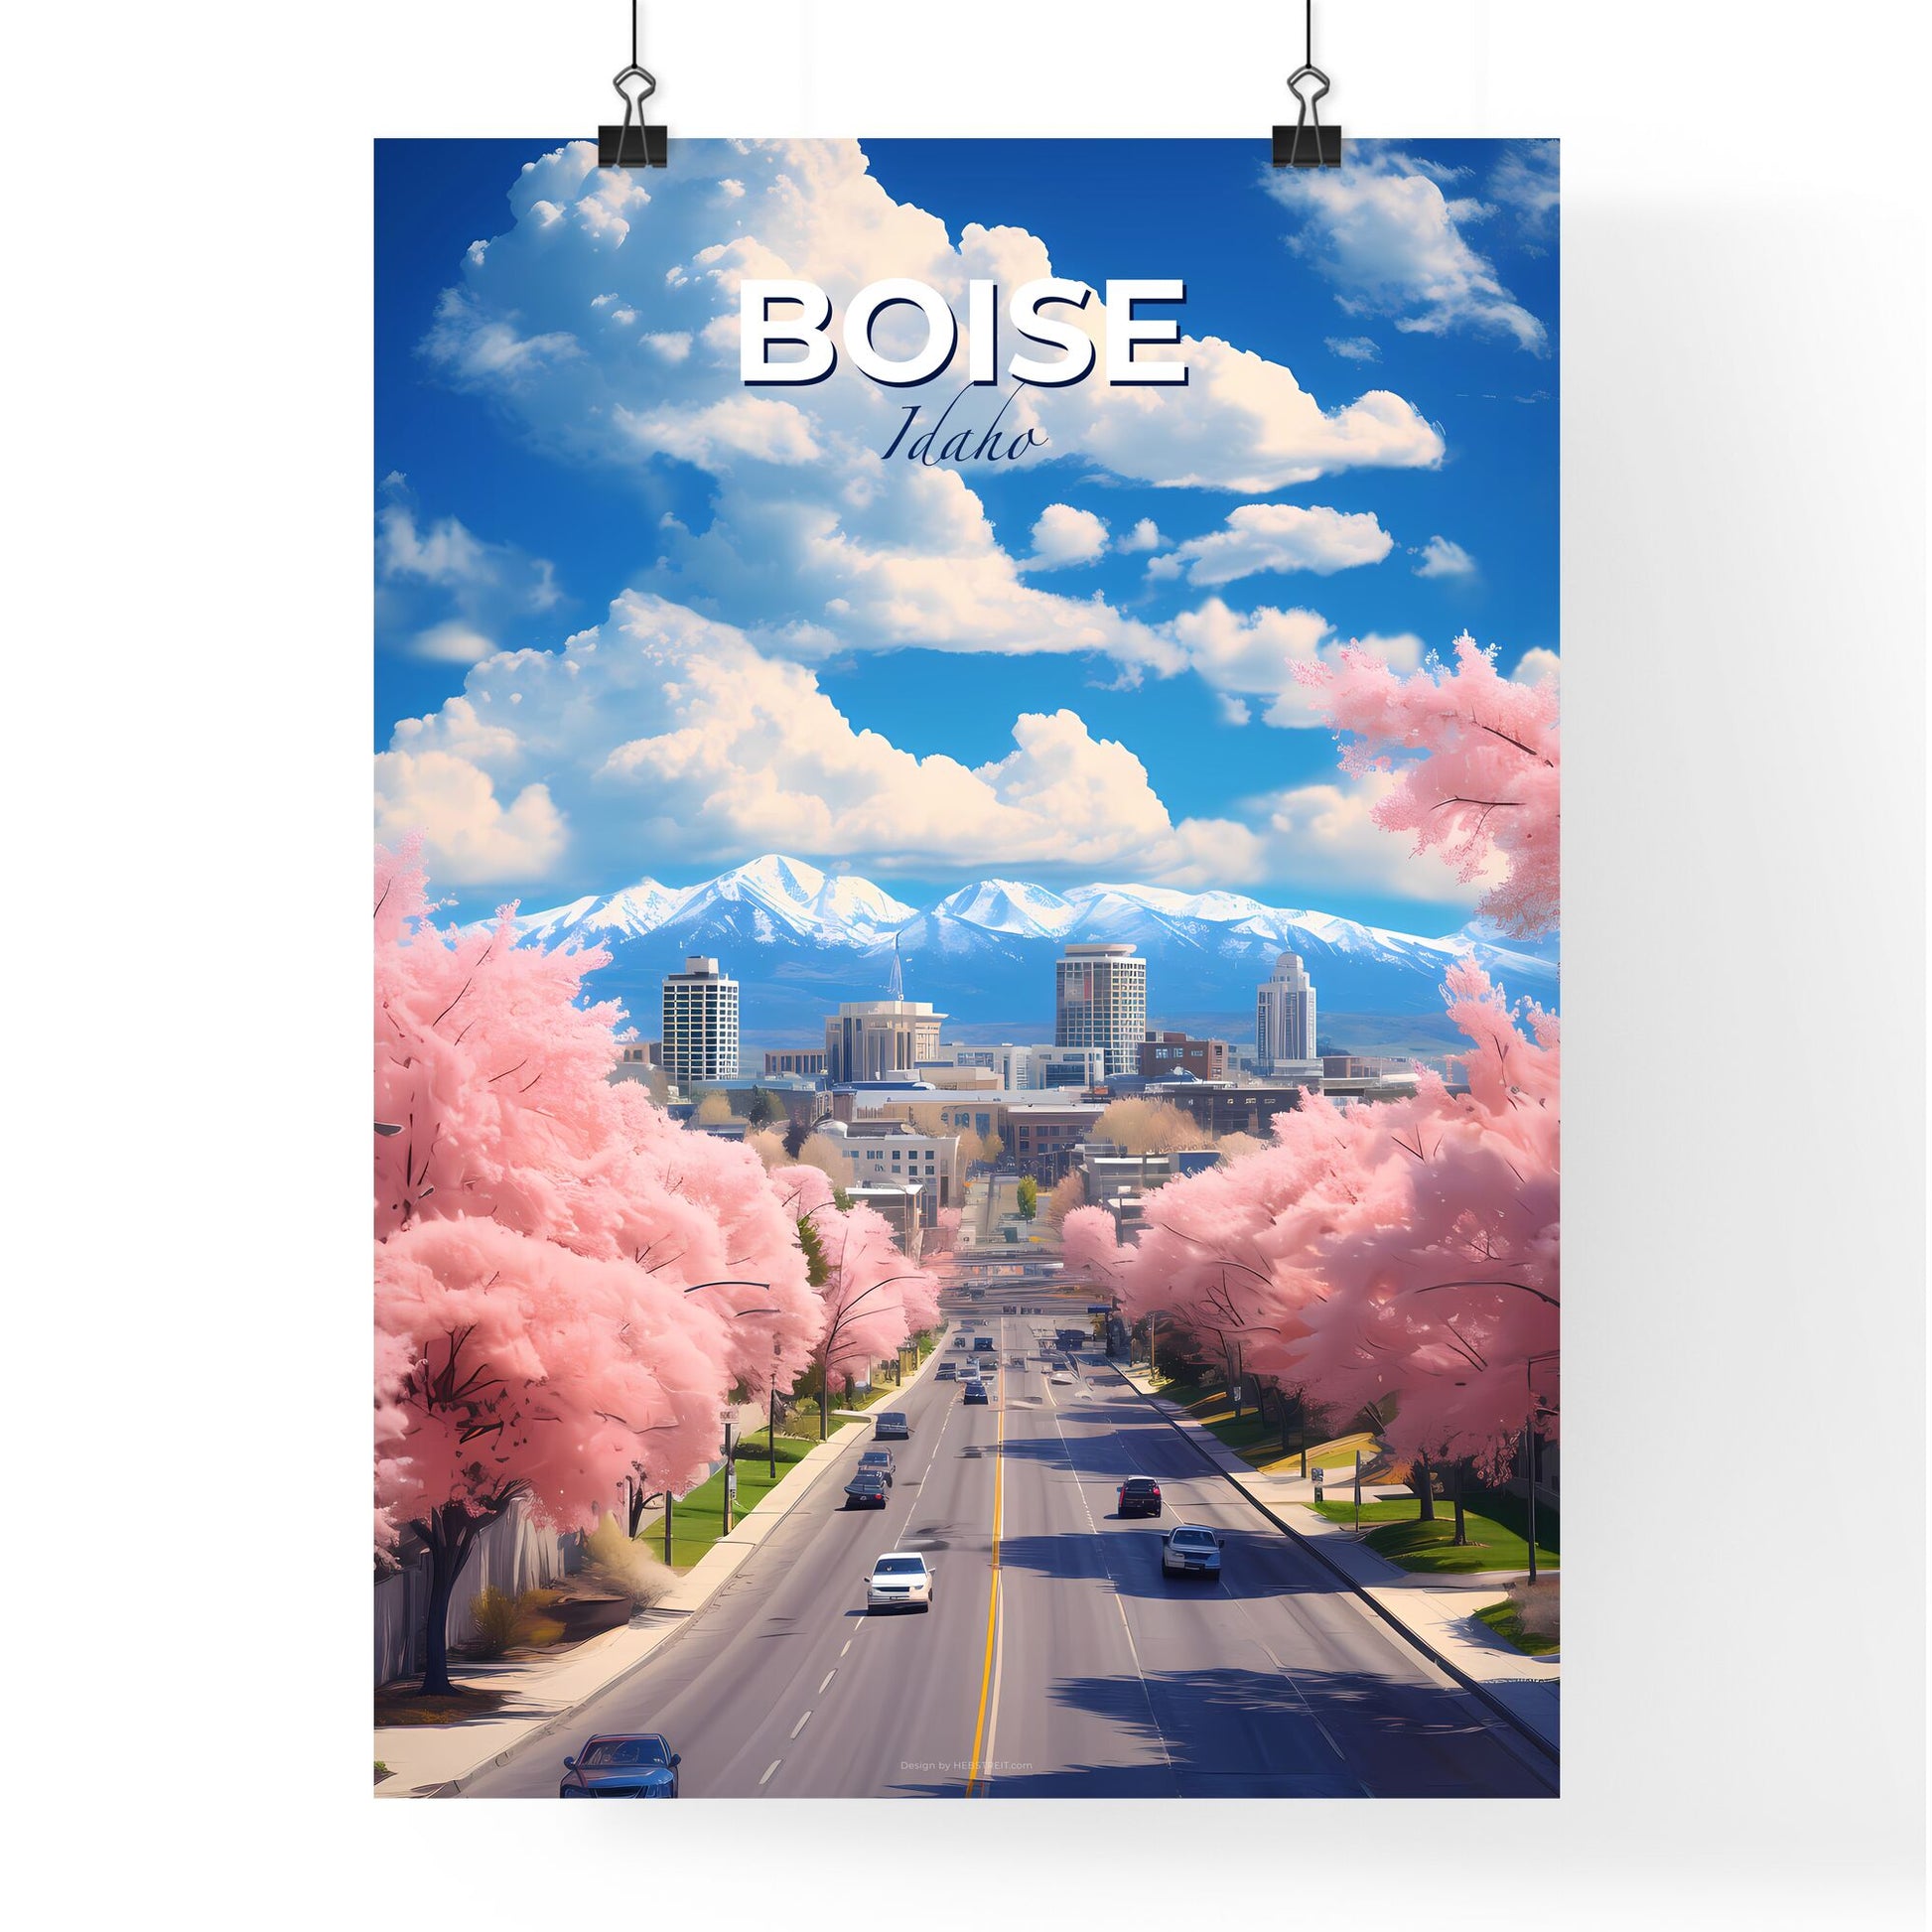 Boise Idaho Skyline - A Road With Pink Trees And Buildings In The Background - Customizable Travel Gift Default Title